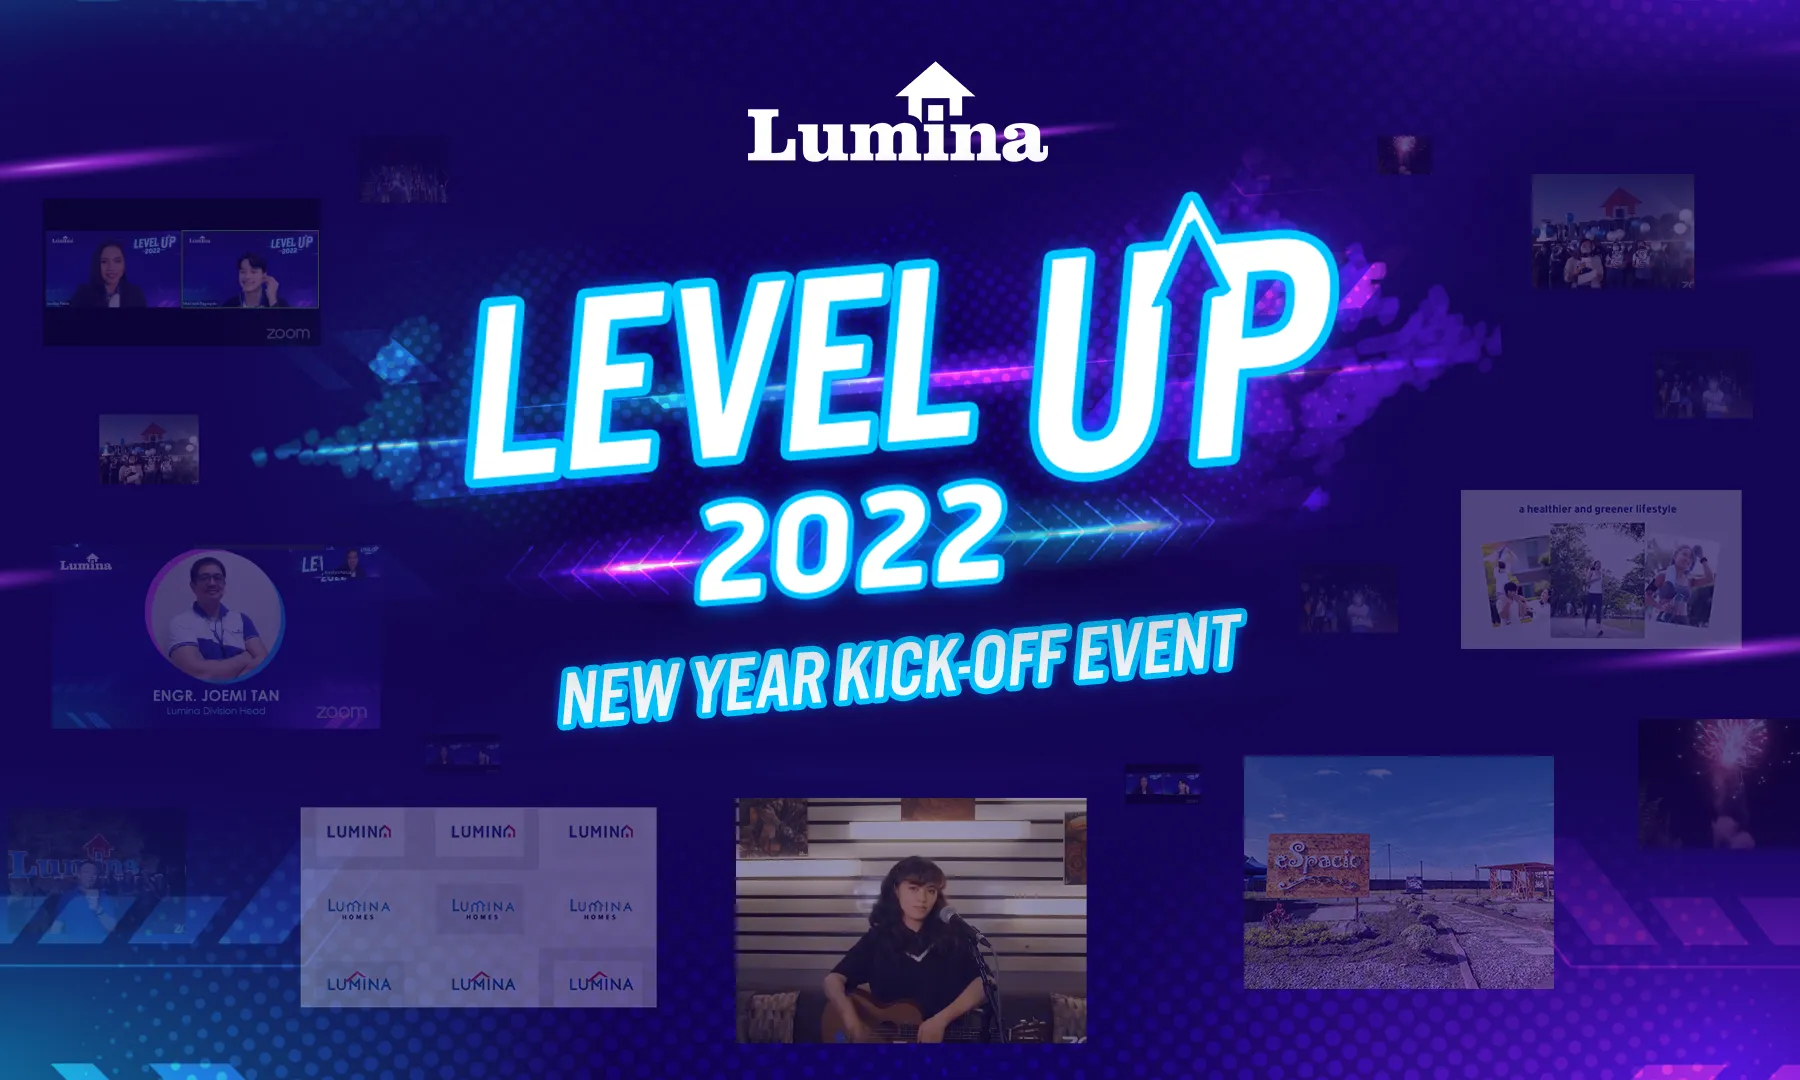 Lumina Homes Welcomes the Year with Level Up 2022